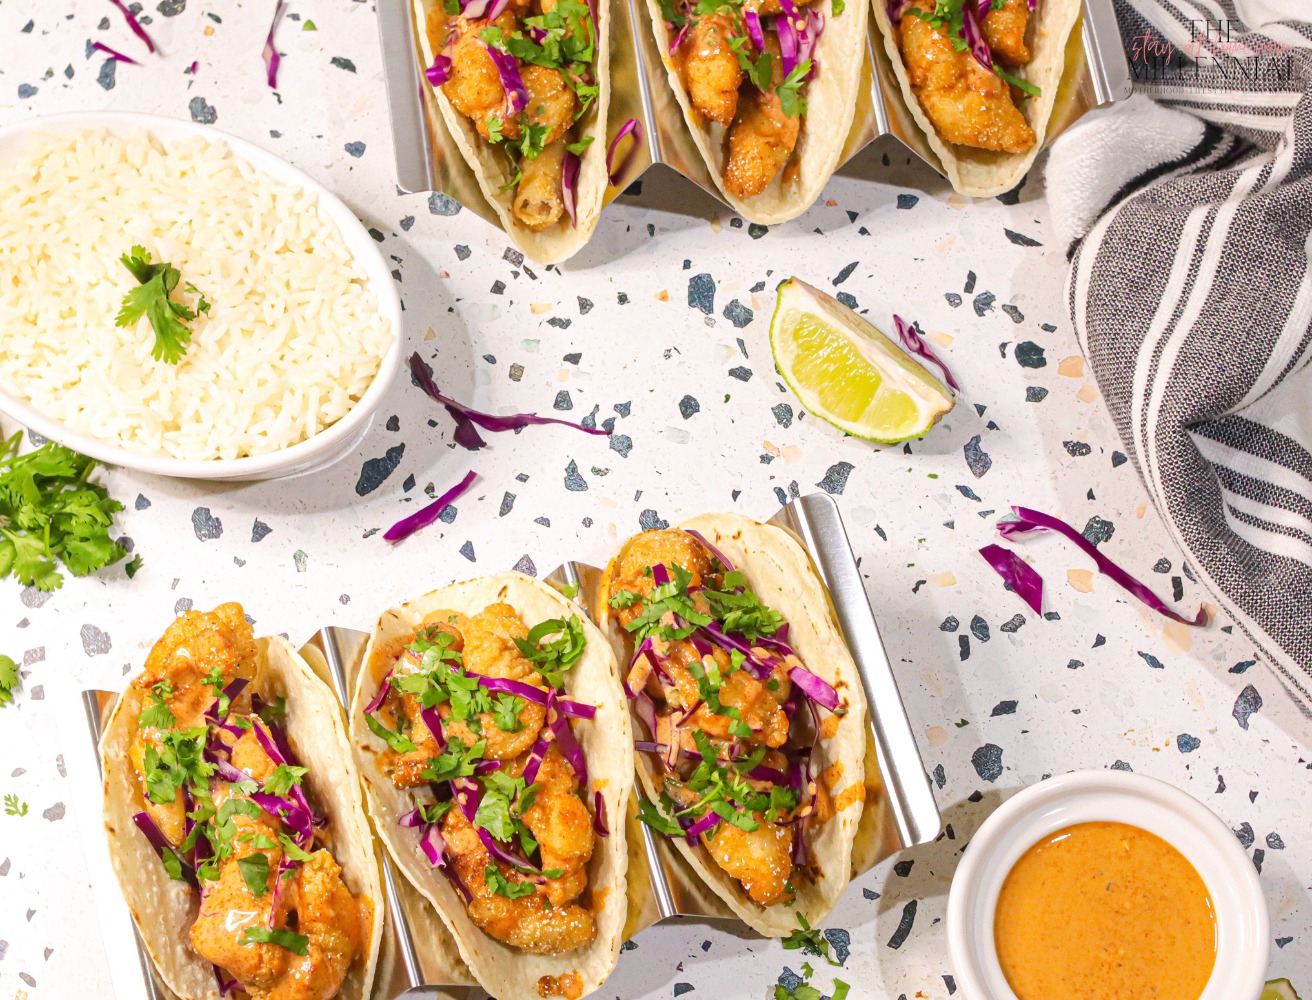 These fried catfish tacos are one of our absolute favorite go-to meals and are the perfect hearty dinner solution for any day of the week!